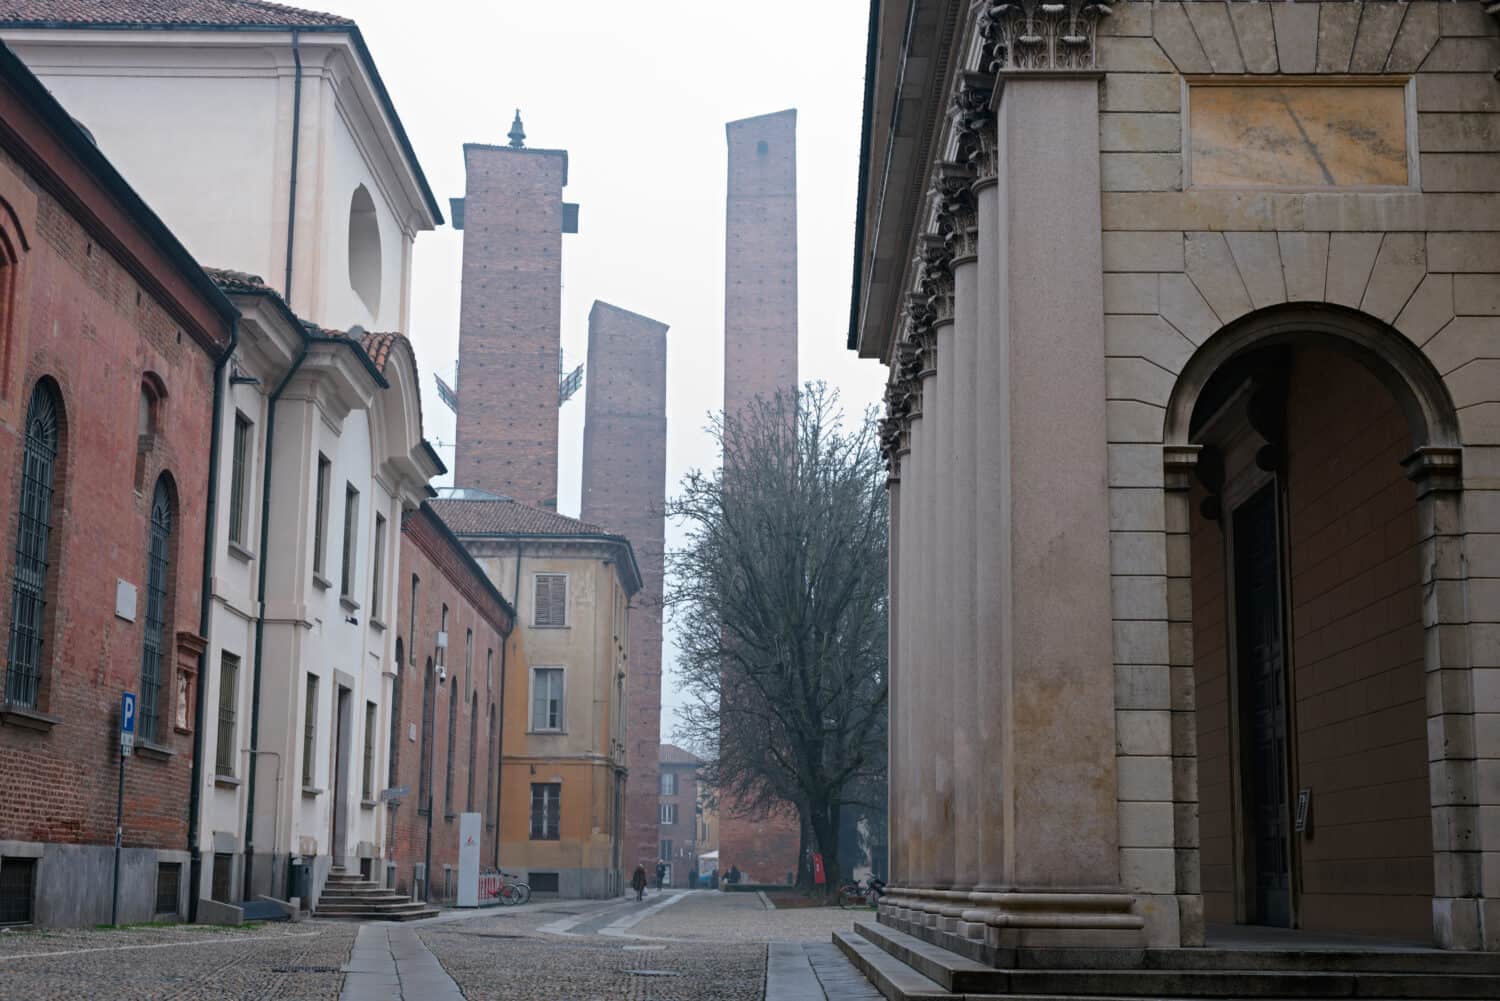 Medieval brick towers in front of the university building in Pavia. Northern Italy